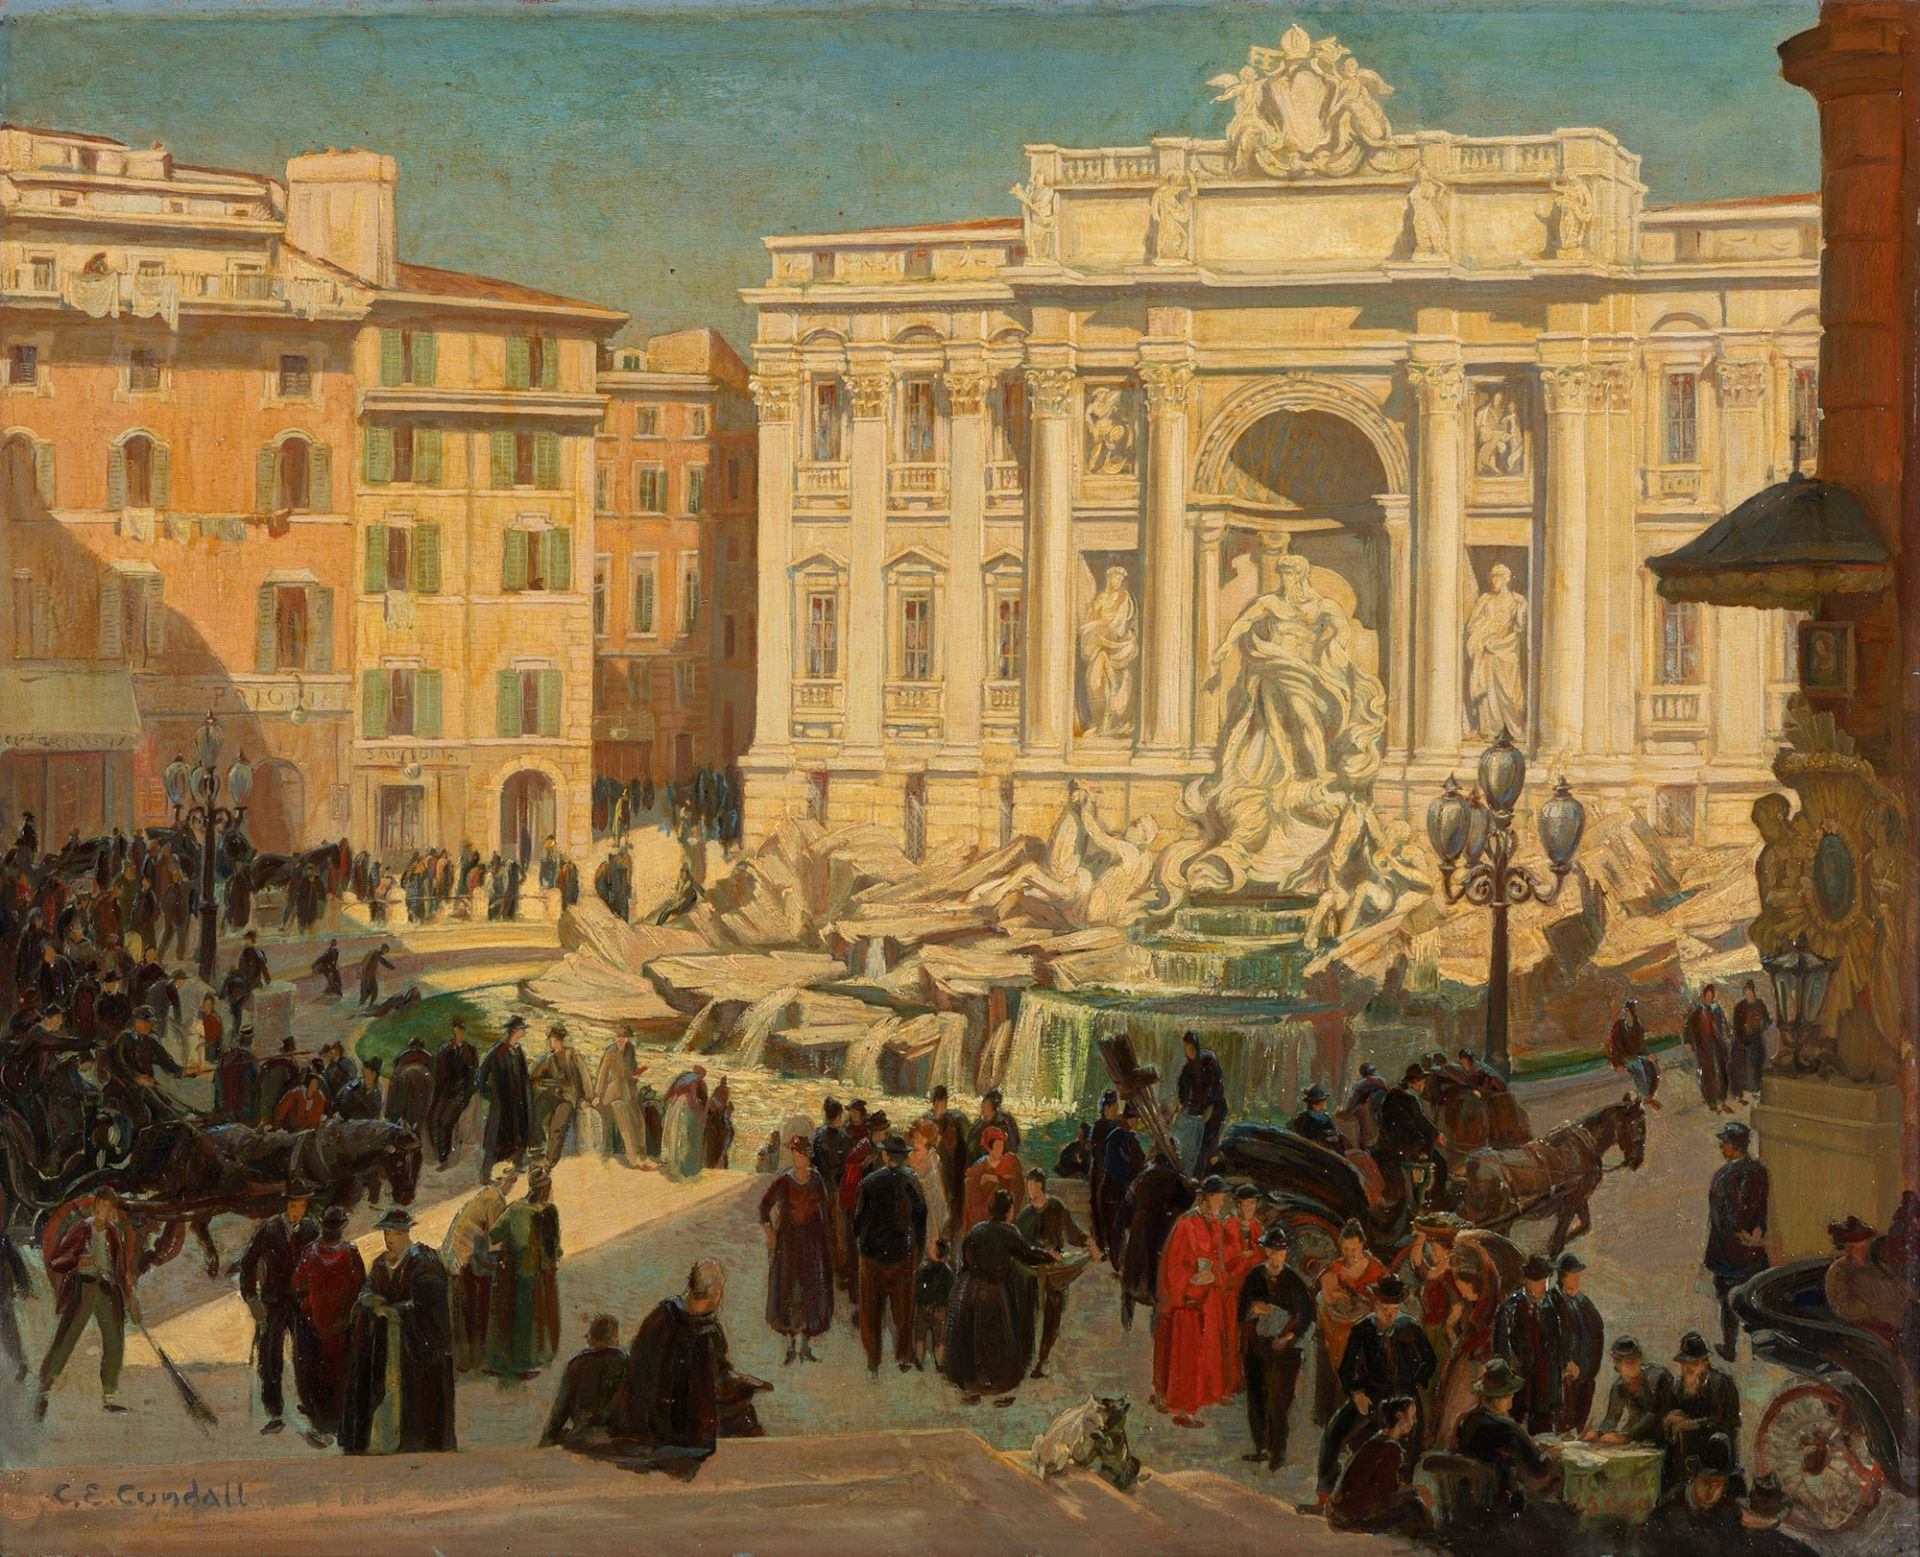 Charles Ernest Cundall (Stretford 1890-Chelsea 1971) - Rome, the Trevi Fountain